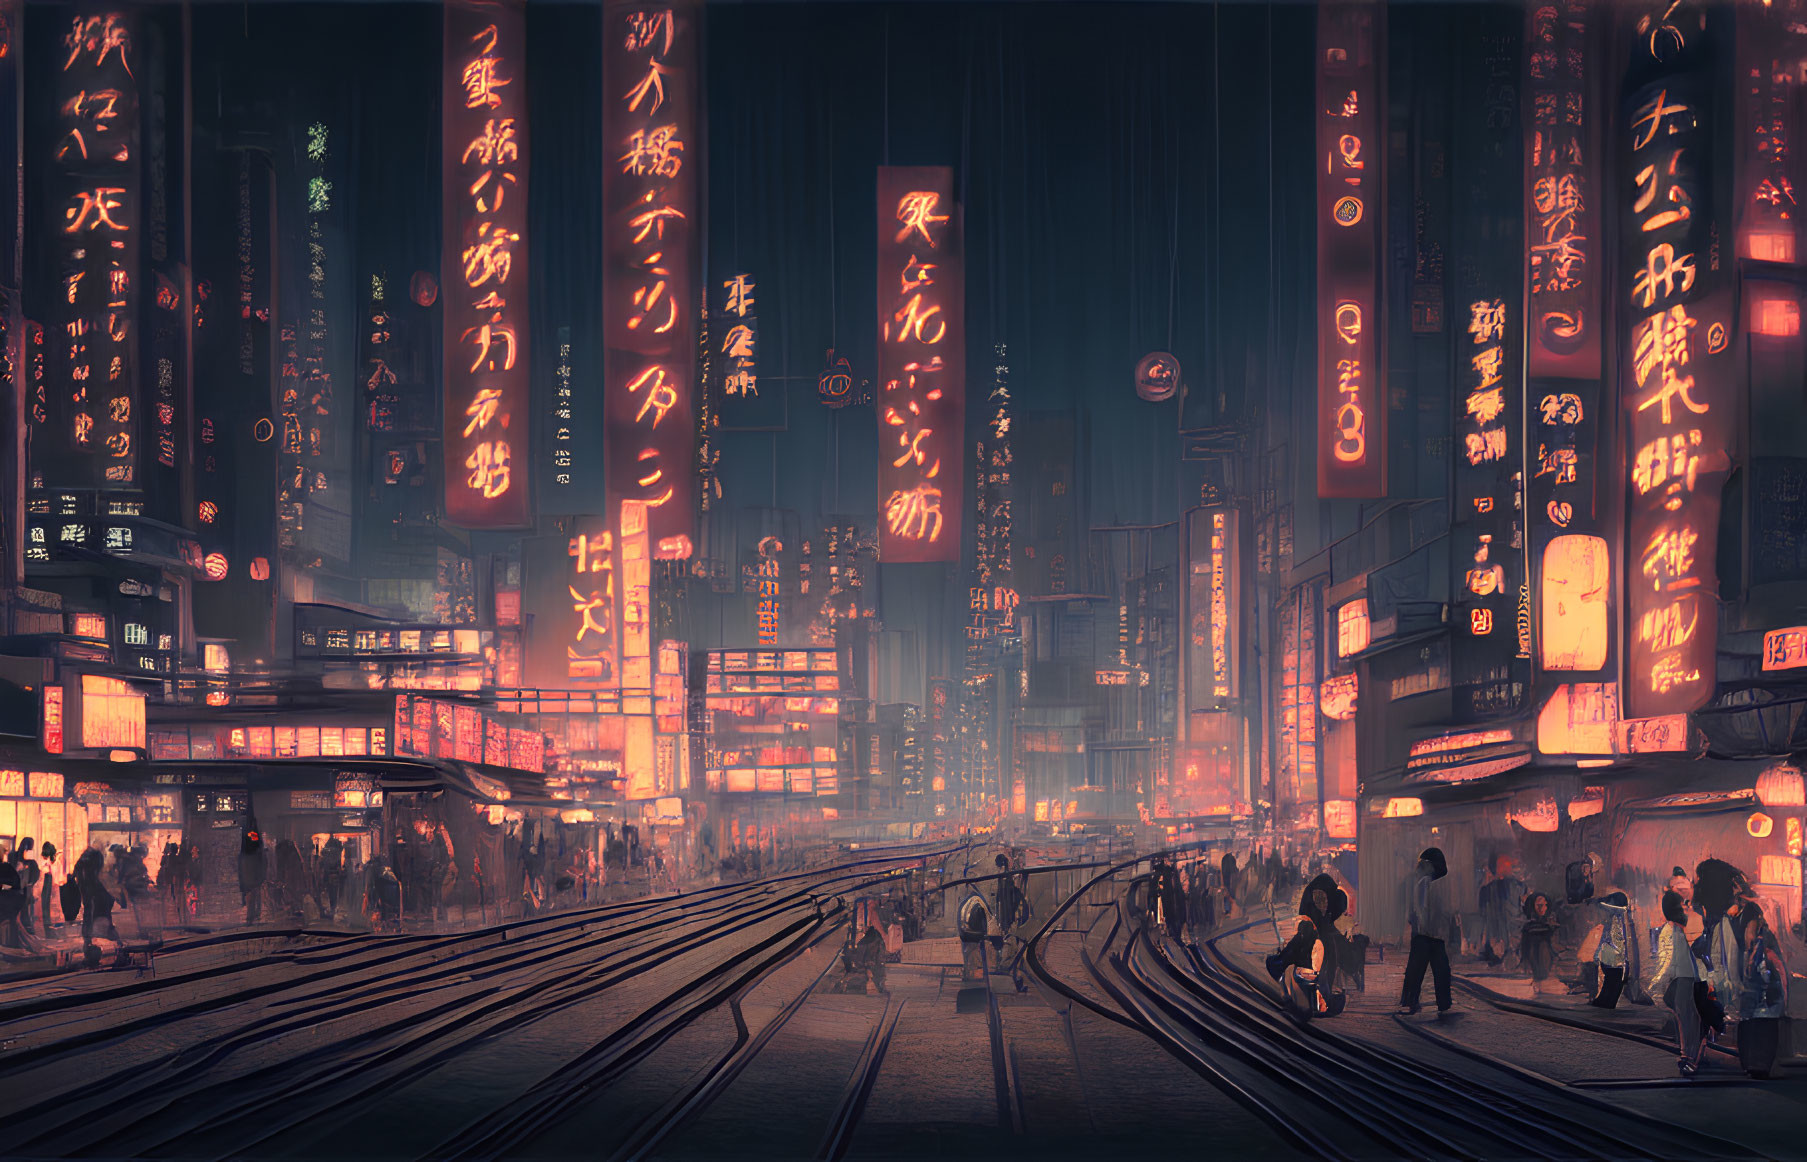 Futuristic cyberpunk cityscape at night with neon signs, train tracks, and silhouettes